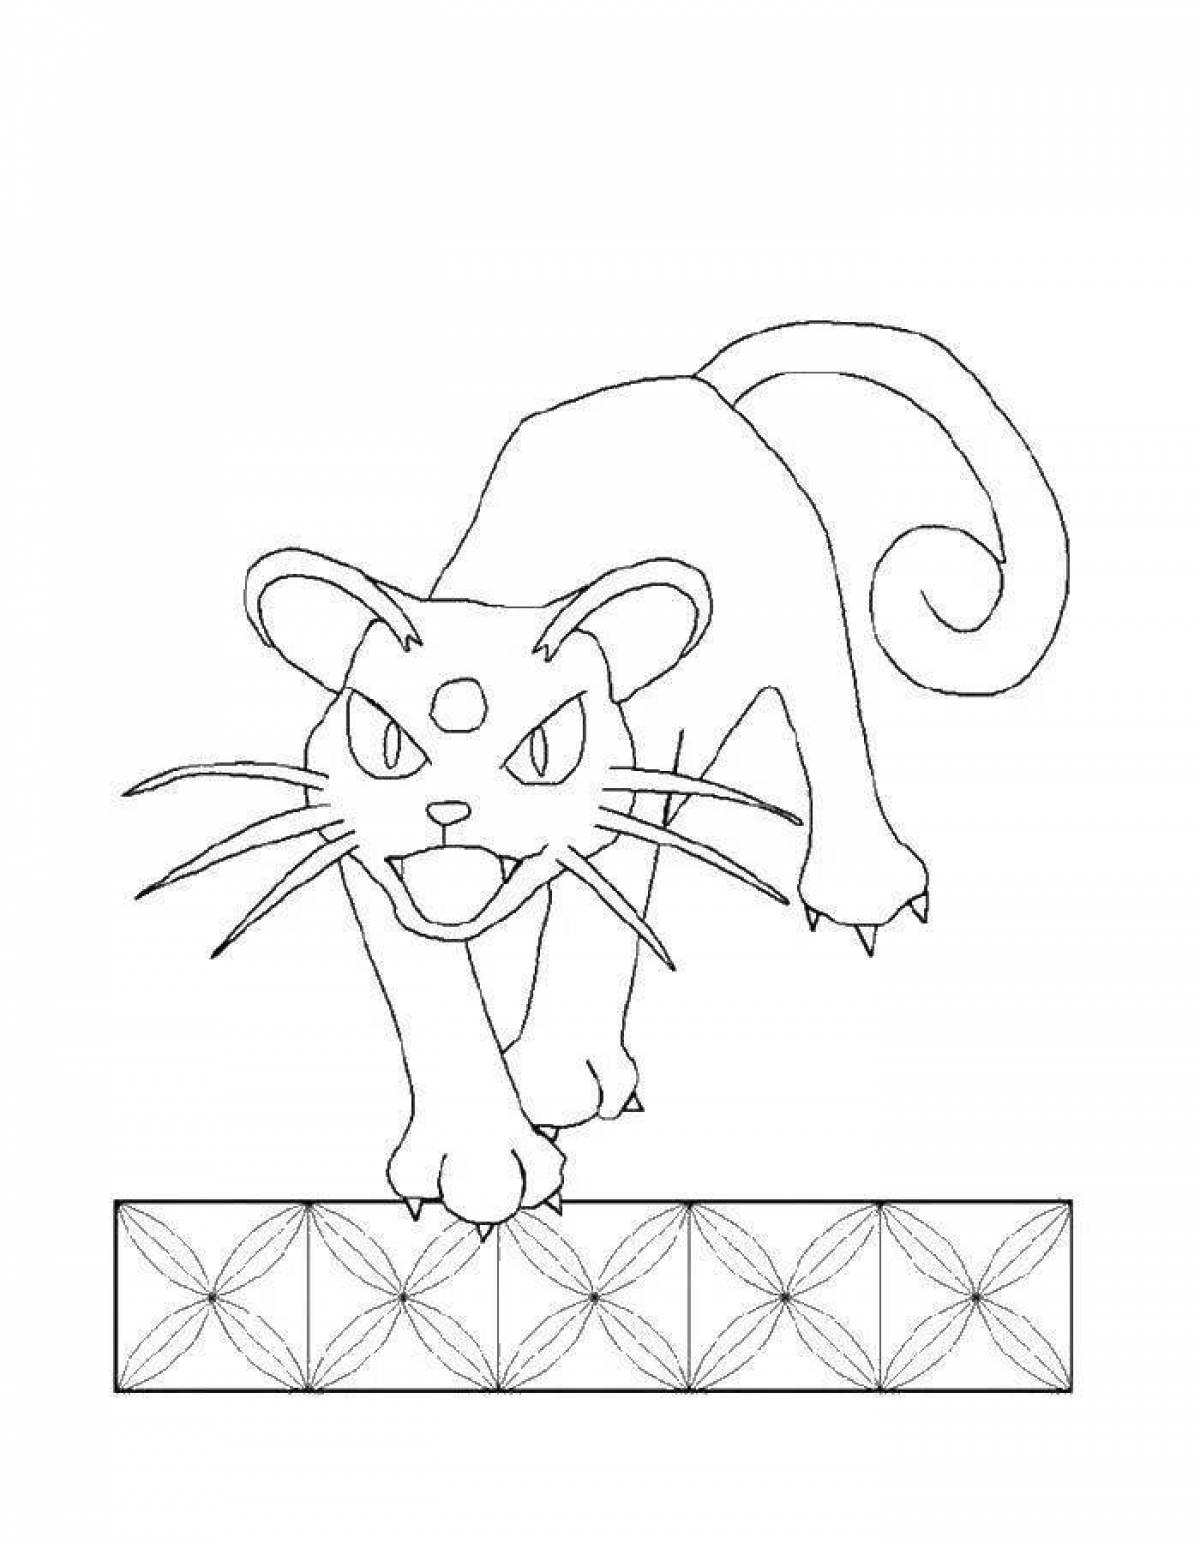 Sweet meowth coloring page